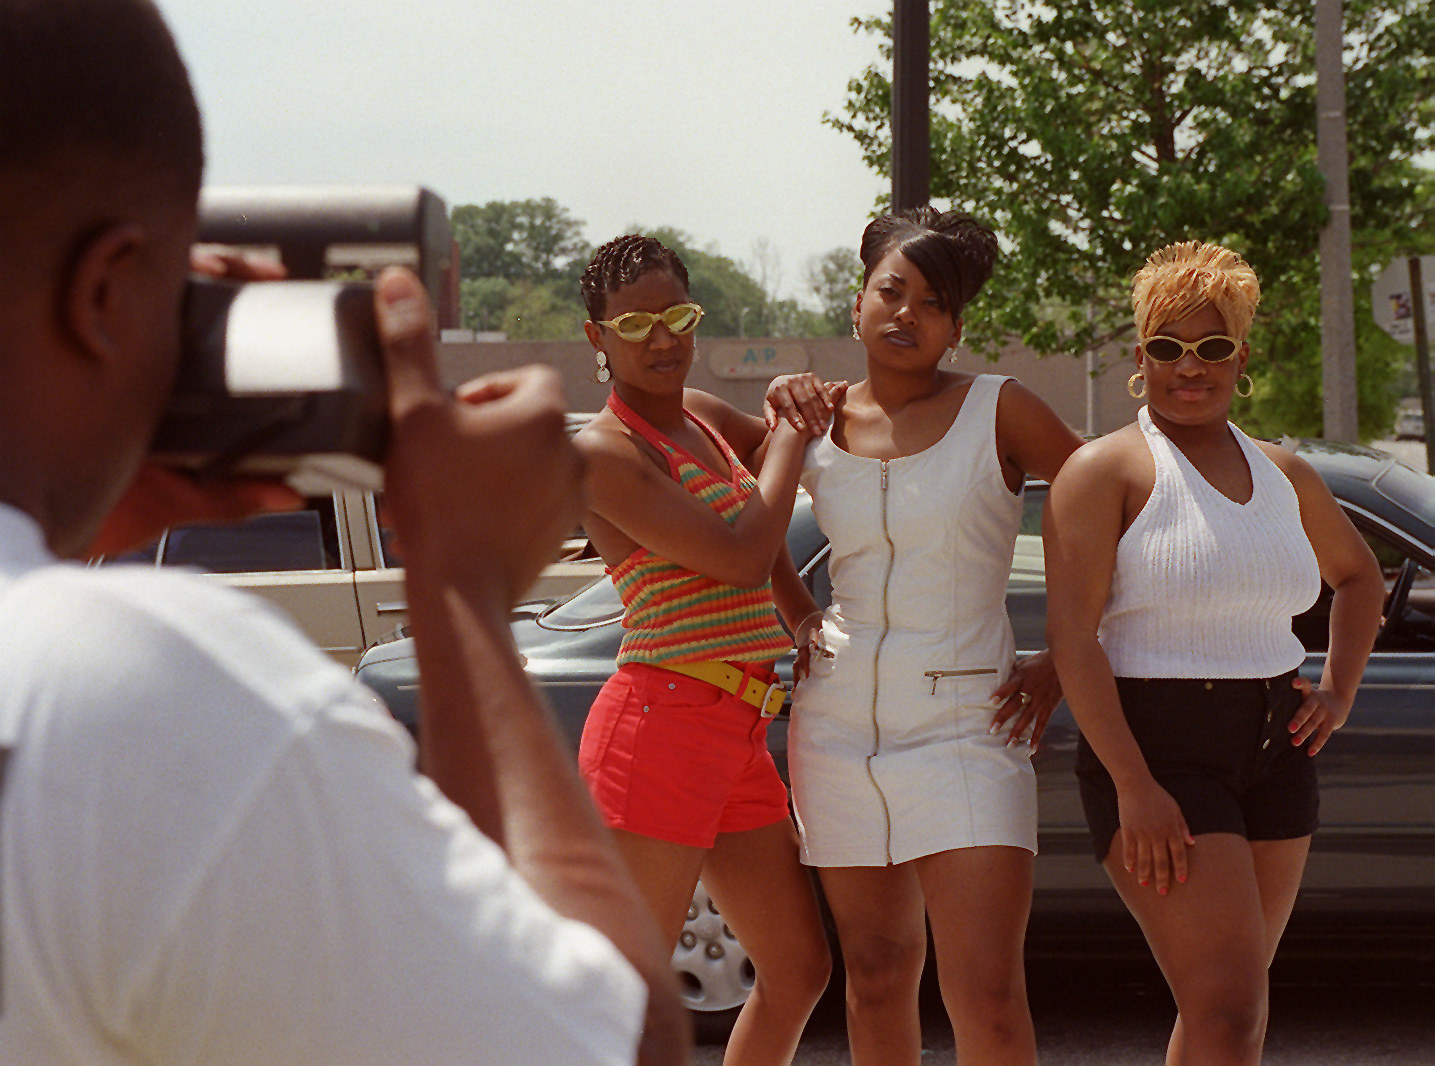 three women pose in front of a car and a man takes a photo in the foreground 